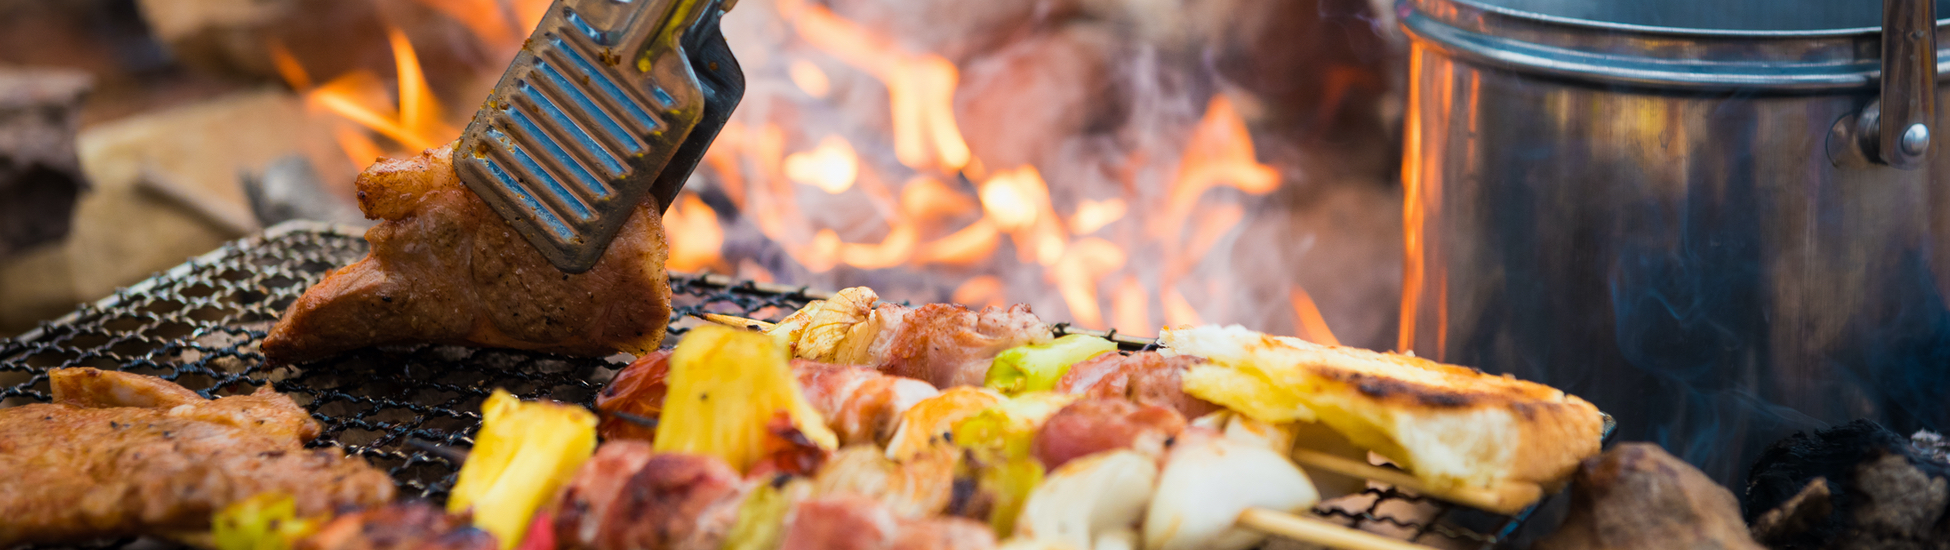 Image of kabobs and chicken grilling on the campfire